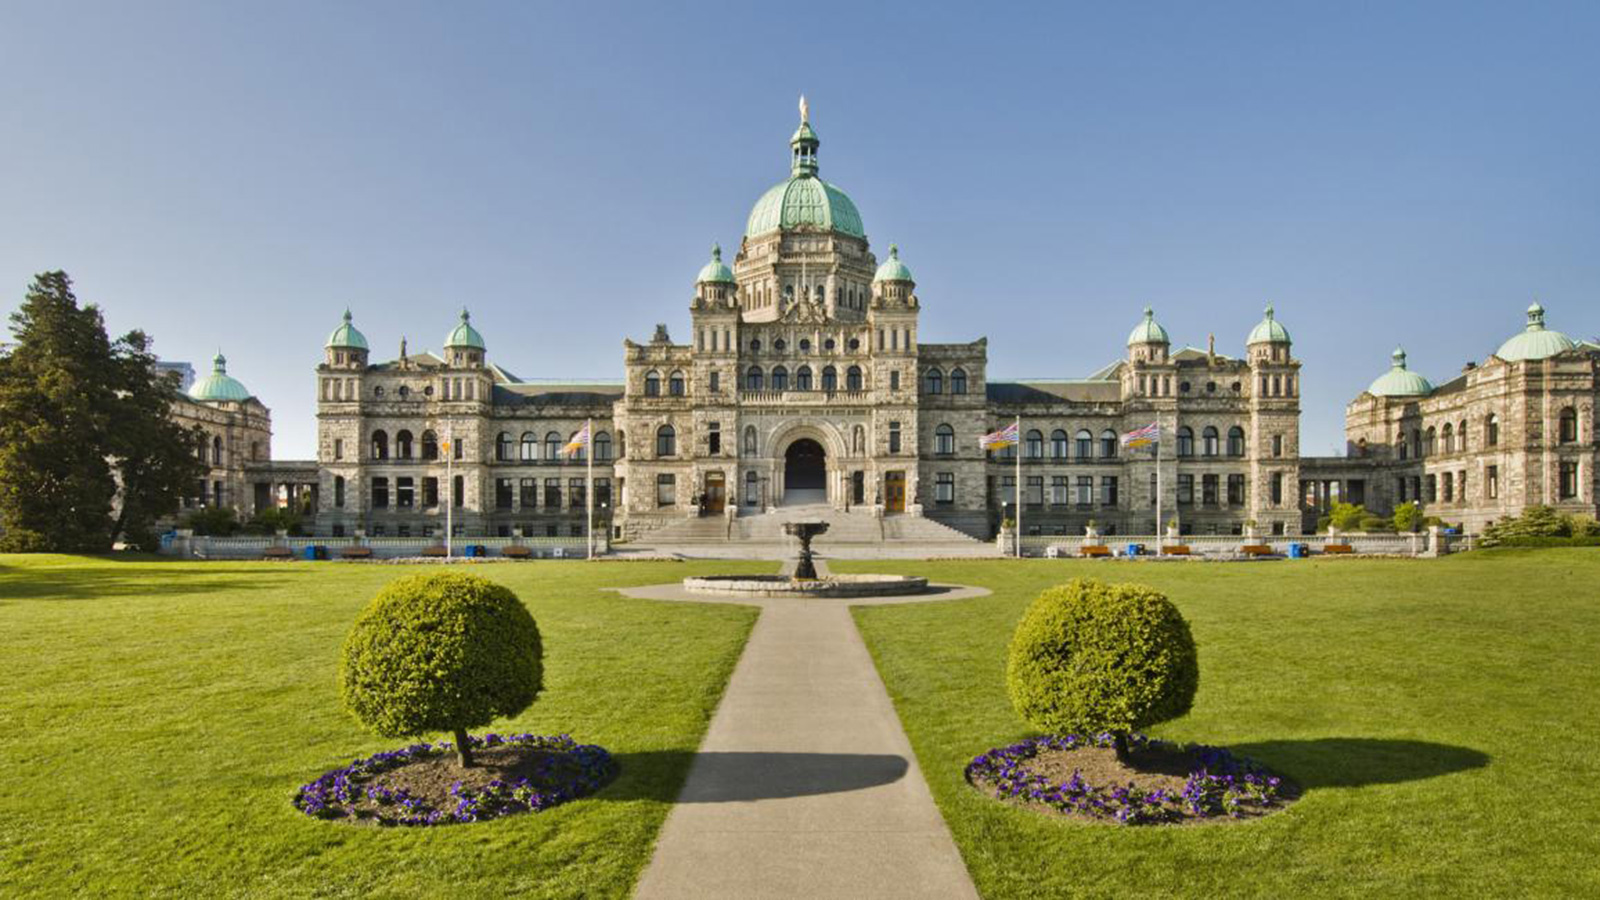 Image of the capital of British Columbia